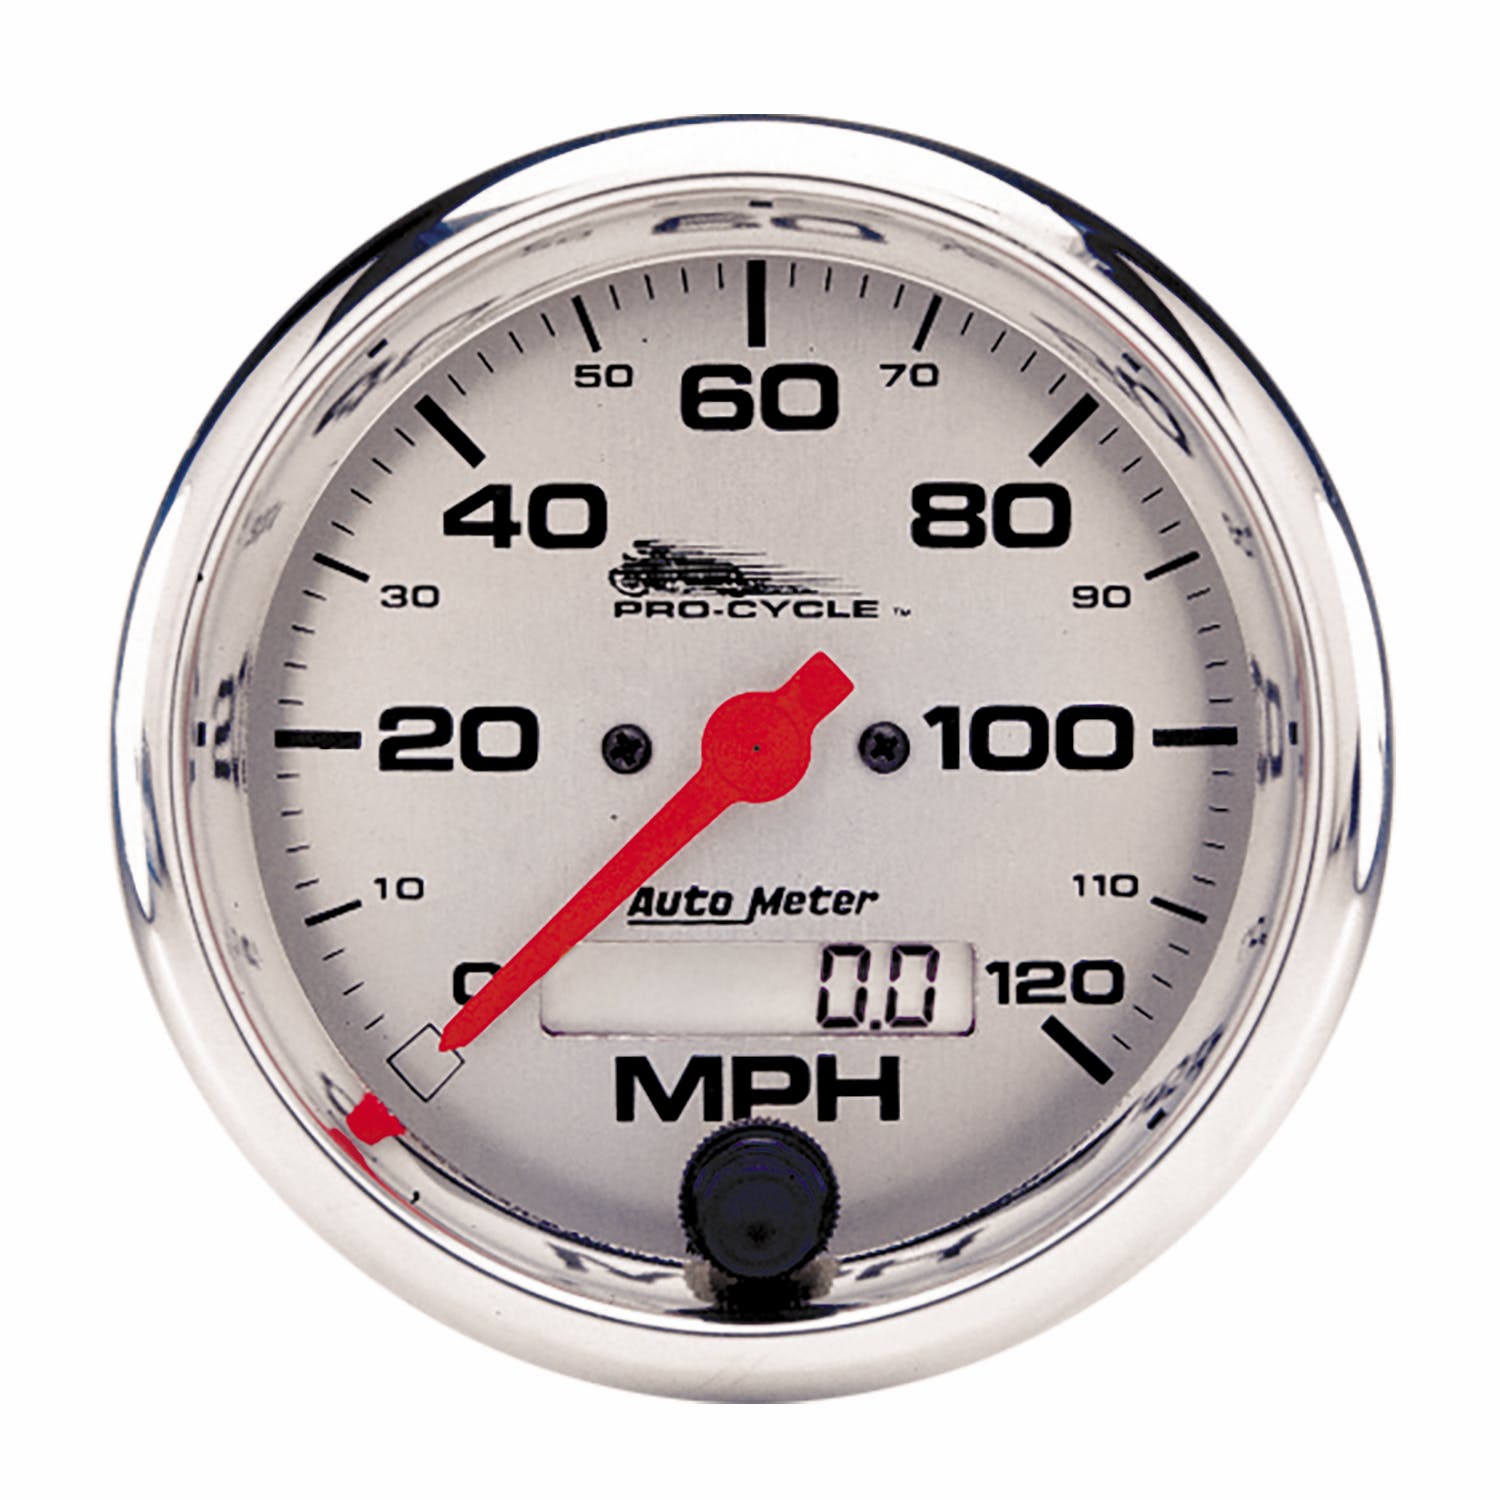 AutoMeter Products 19352 Speedometer Gauge, Electric Silver-Pro Cycle 3 3/4, 120 MPH